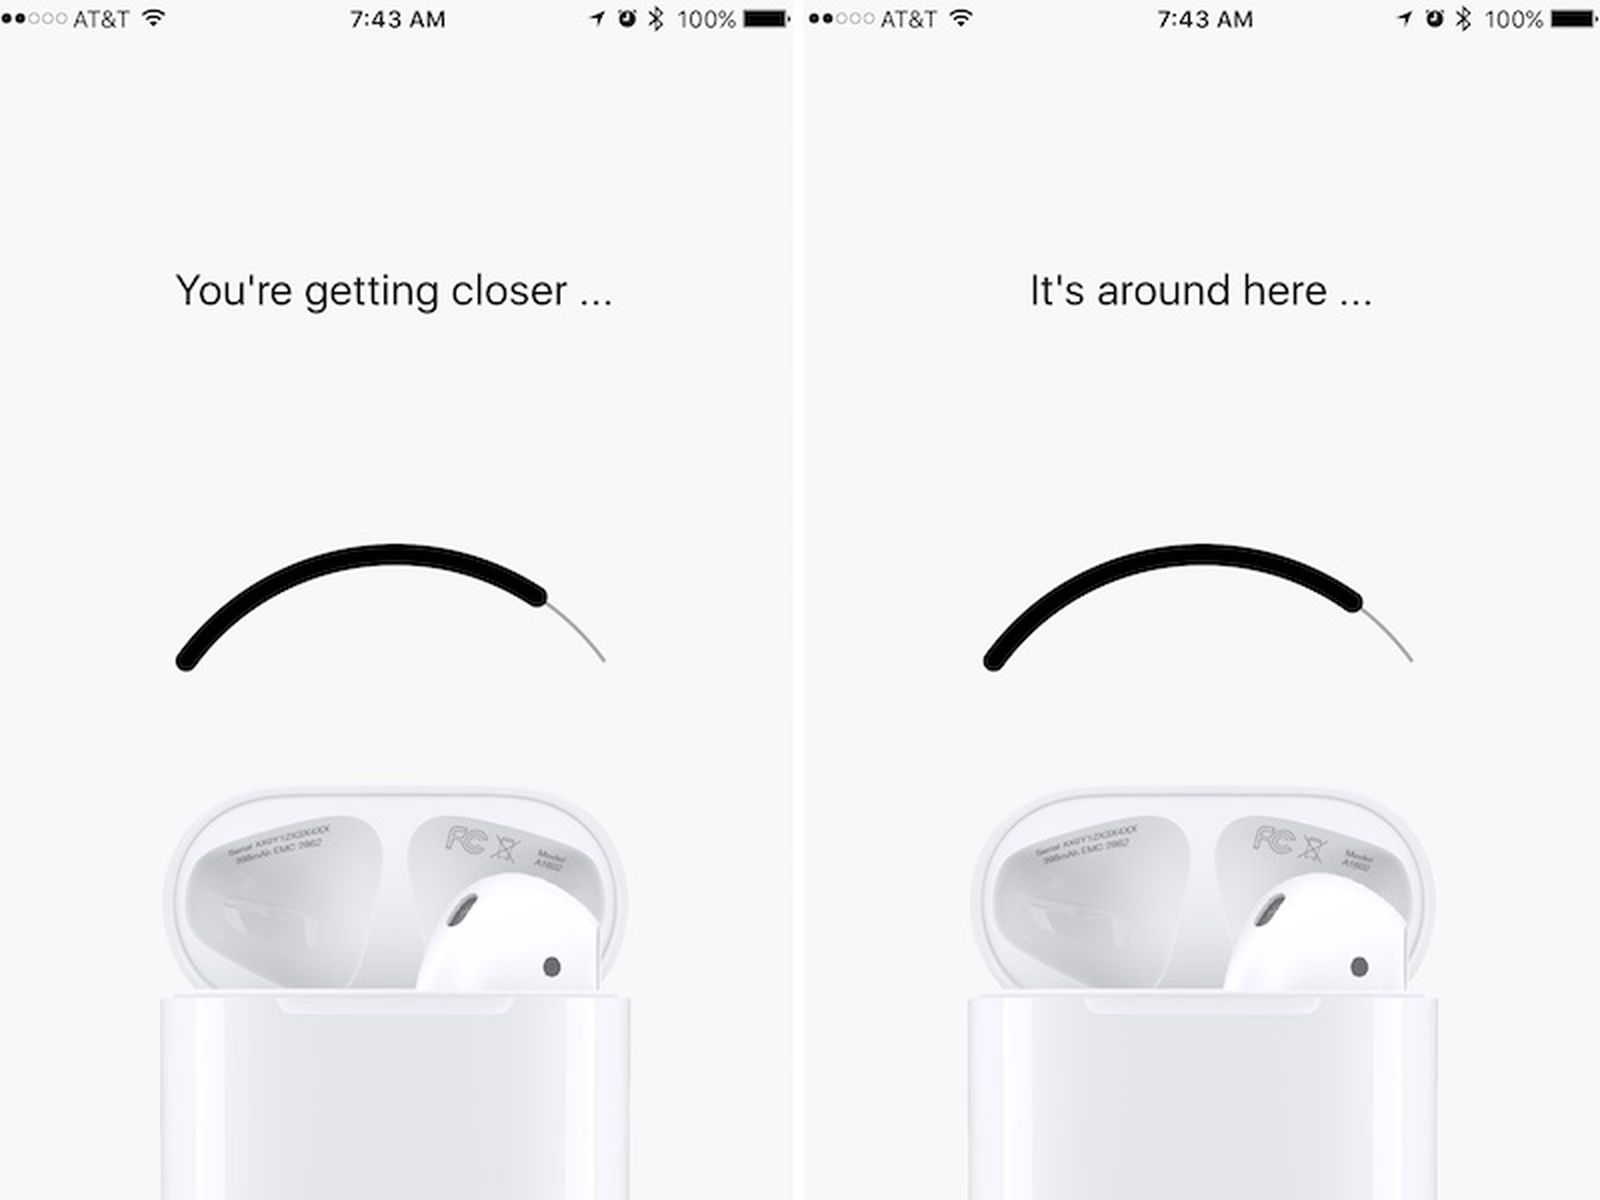 AirPods' App Can Help You Track Down a Missing AirPod [Update: App From App Store] - MacRumors